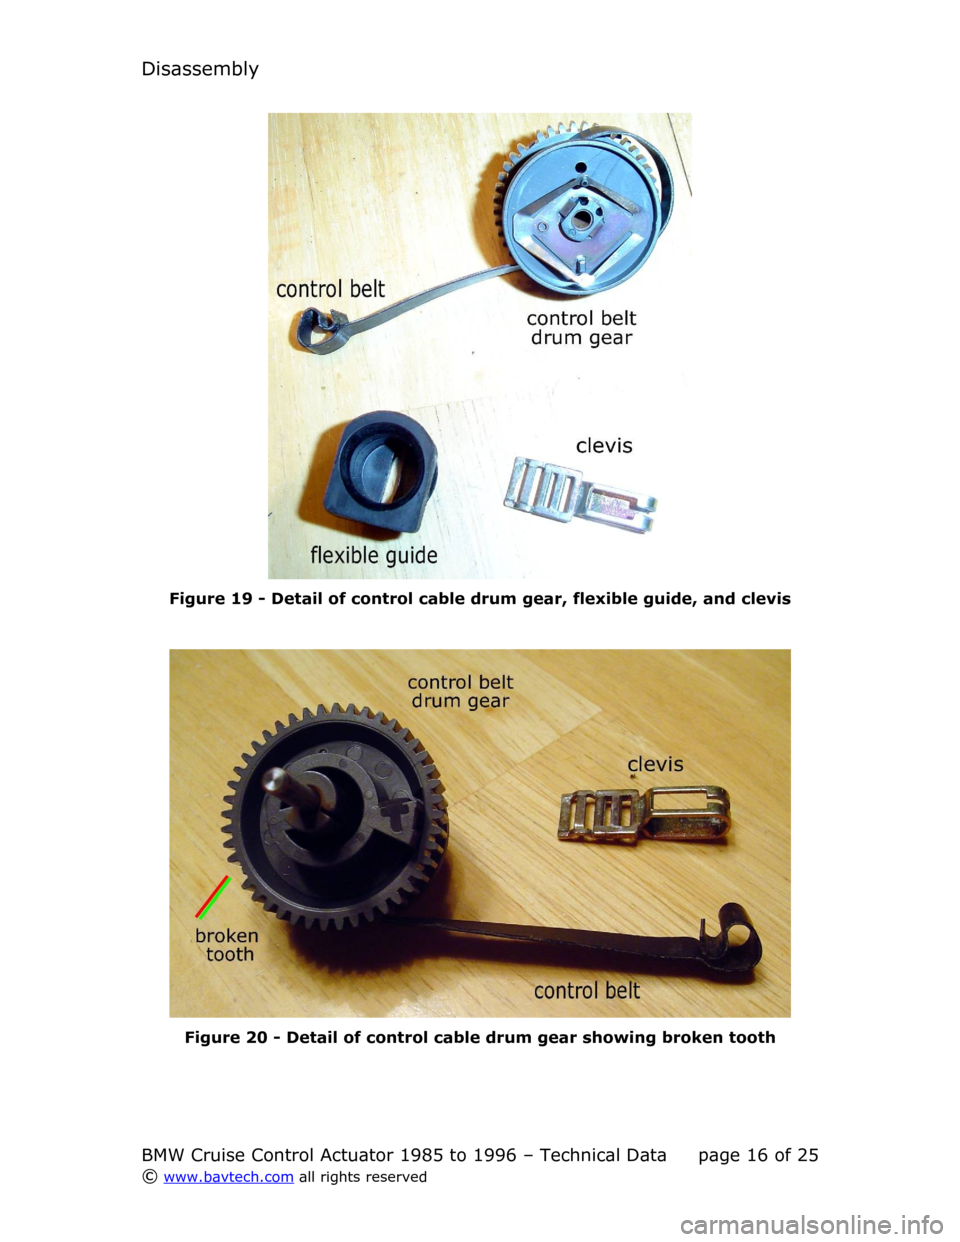 BMW 3 SERIES 1991 E36 Cruise Control Acutator Disassembly
Figure  19  - Detail of control cable drum gear, flexible guide, and clevis
Figure  20  - Detail of control cable drum gear showing broken tooth
BMW Cruise Control Actuator 1985 to 1996 �